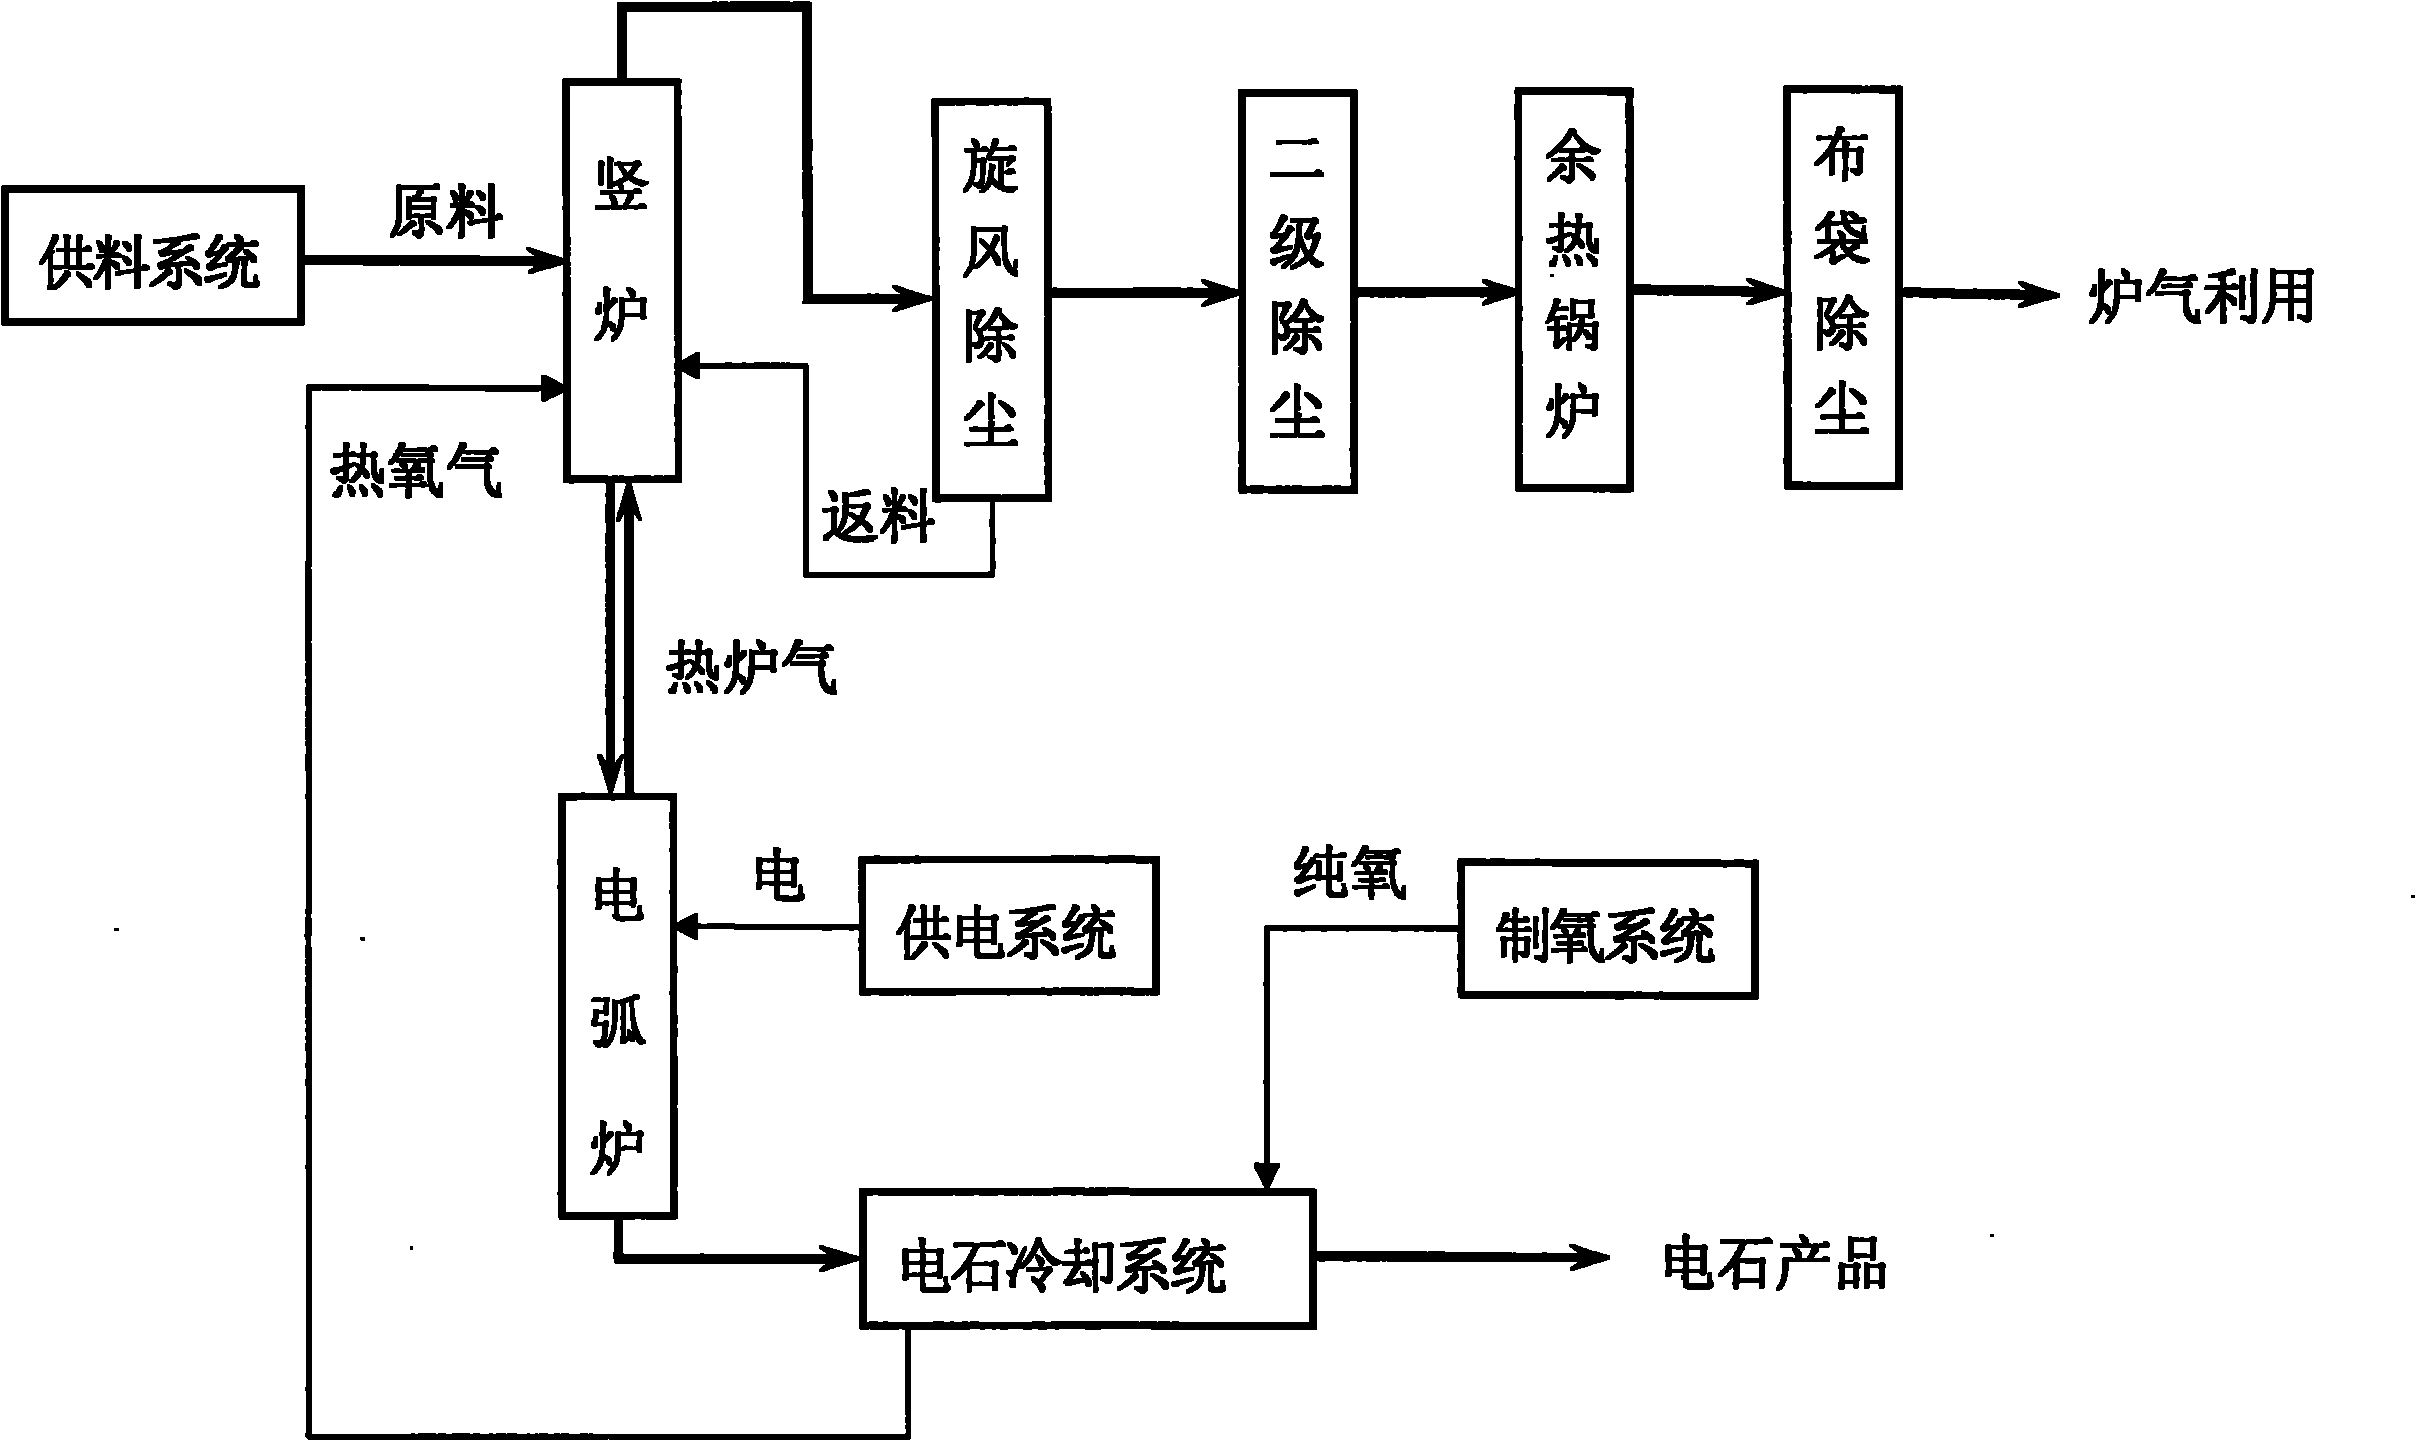 Process and device for producing calcium carbide by using powder raw materials through two-stage method